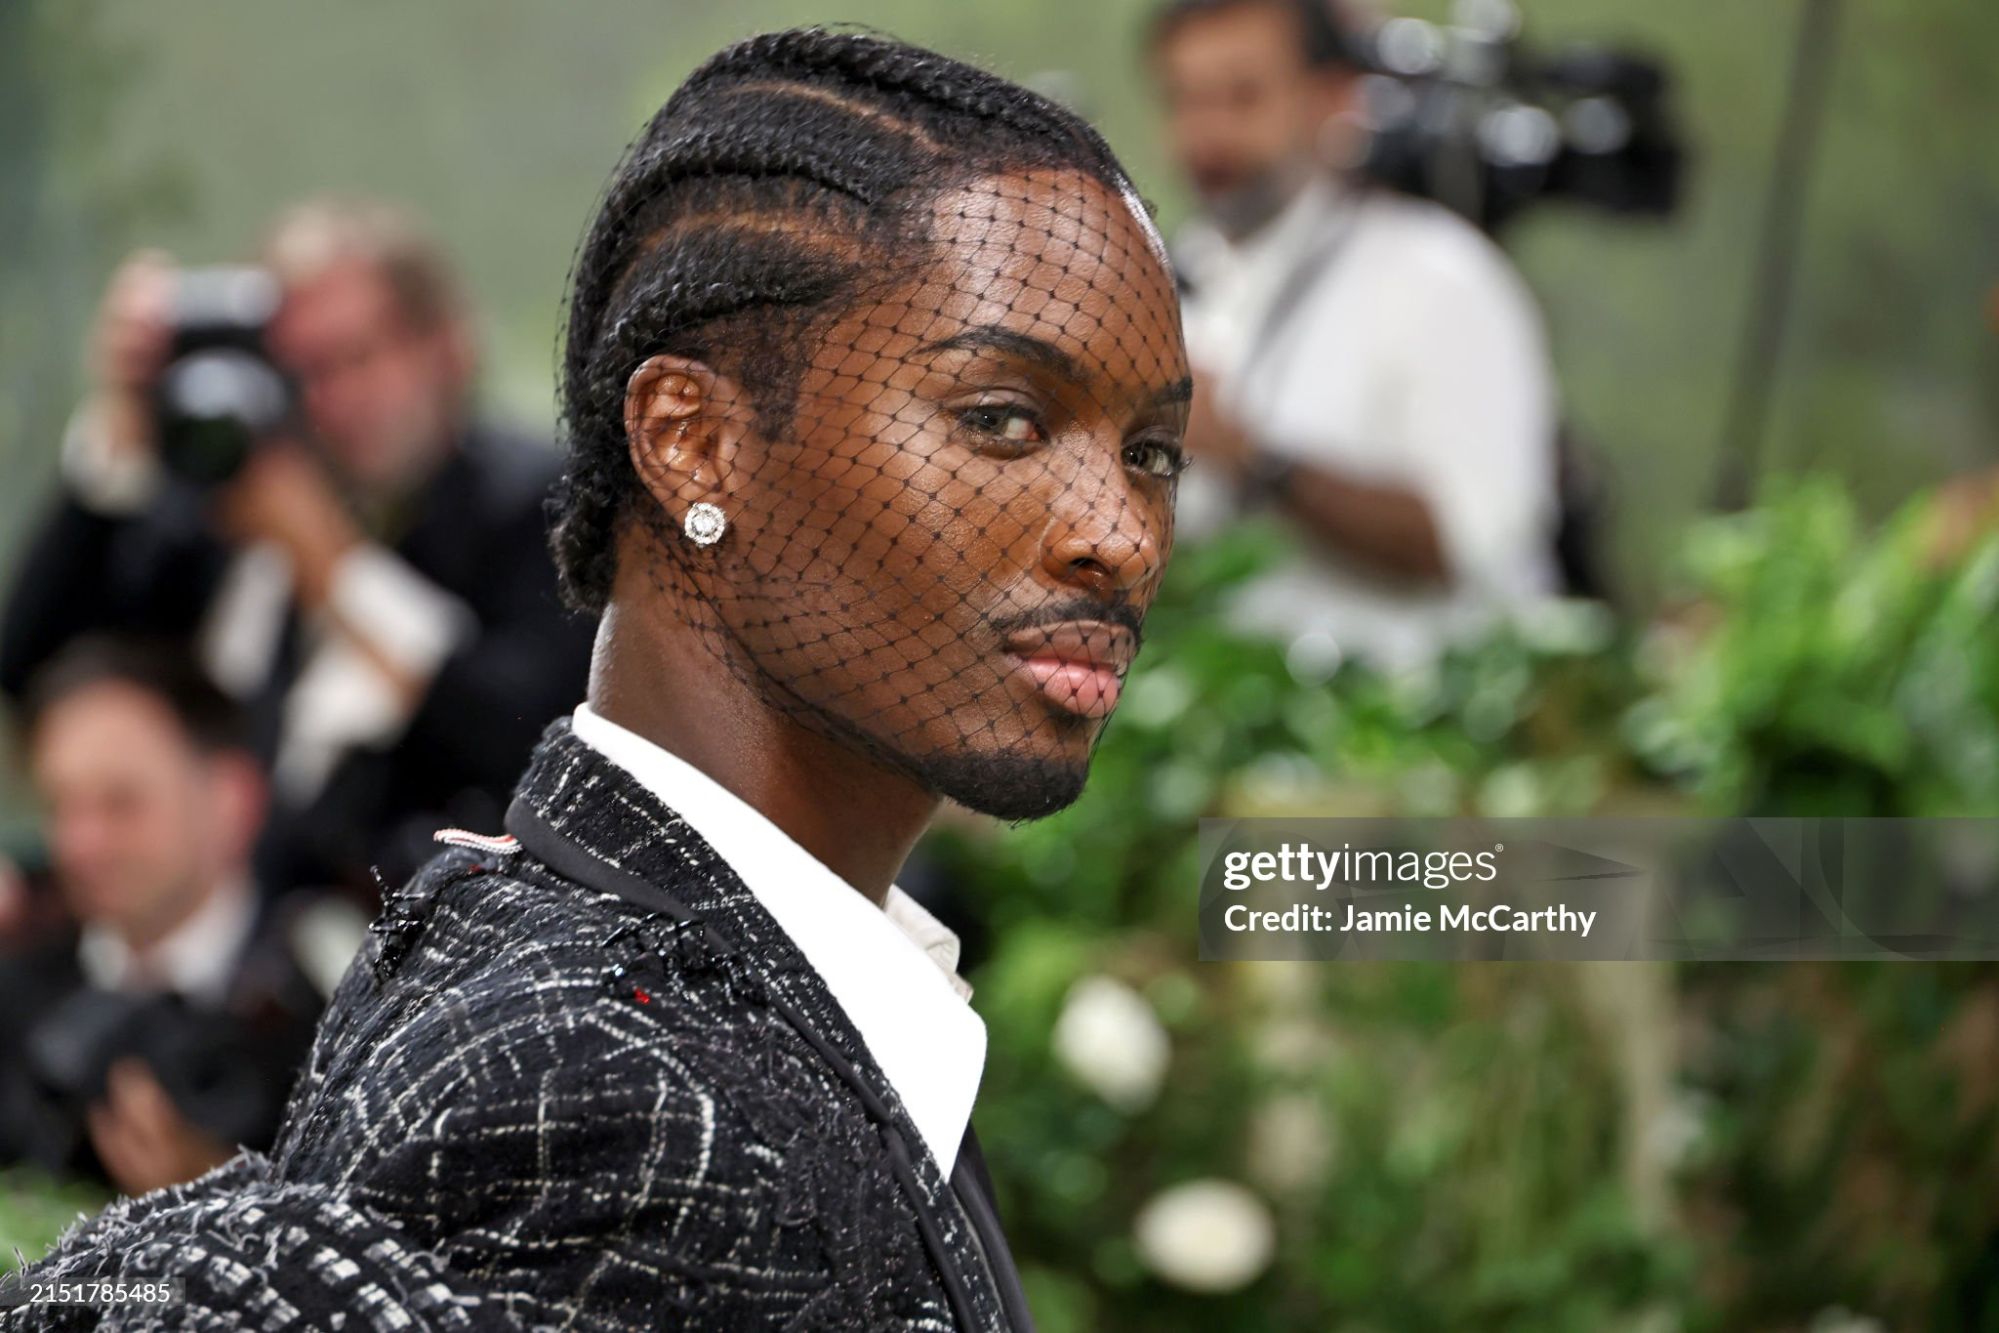 gettyimages-2151785485-2048x2048.jpg